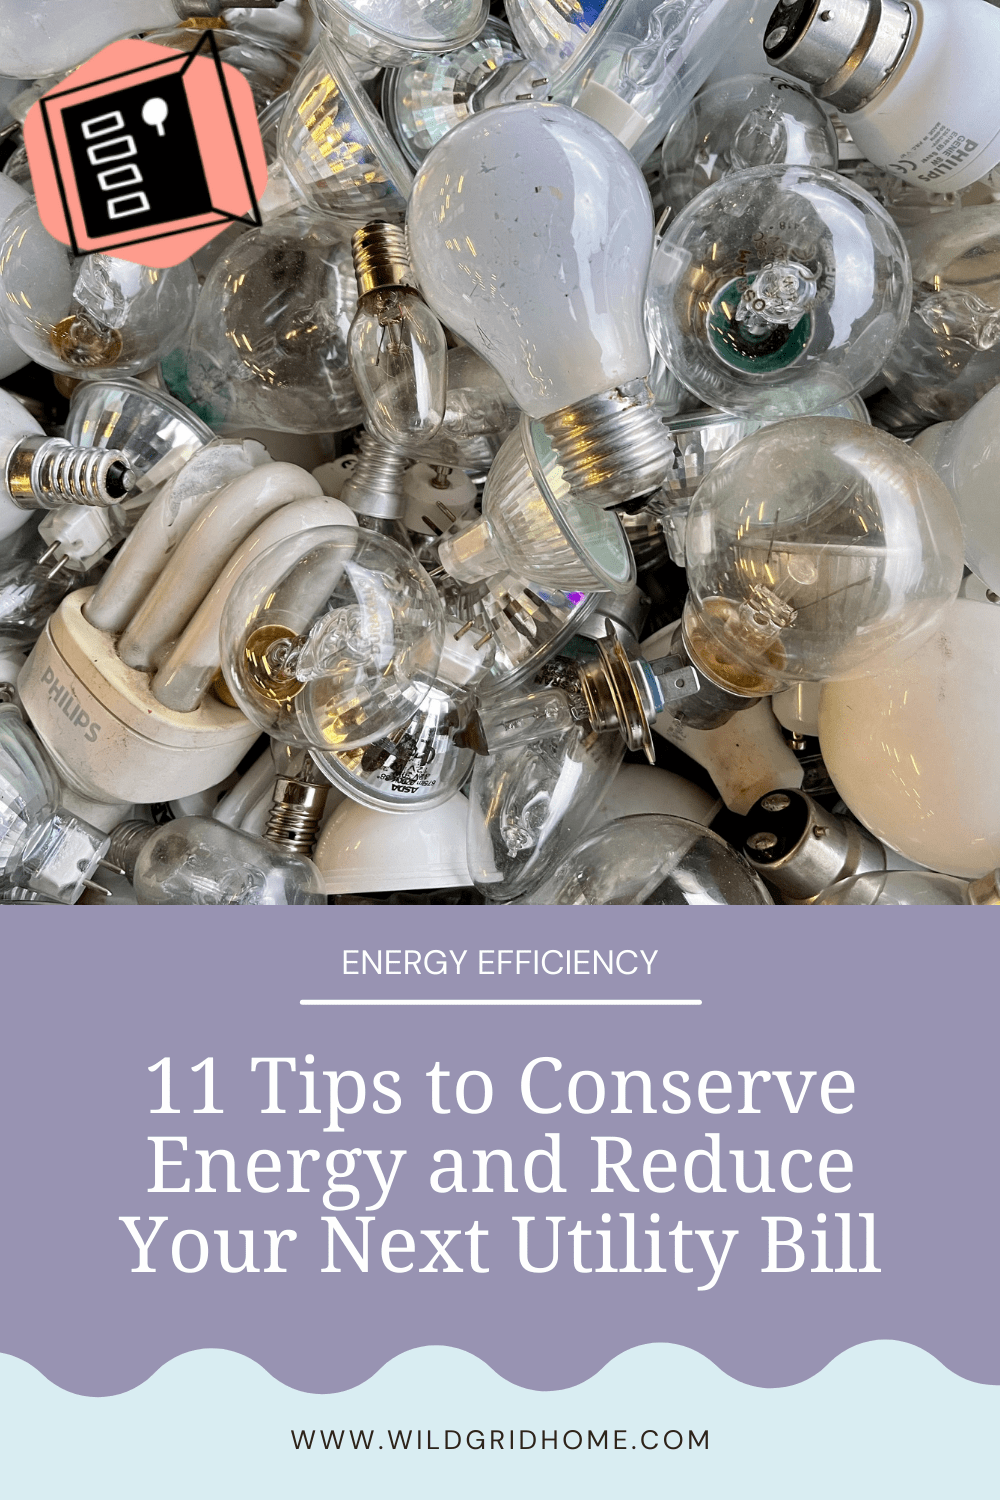 11 Tips to Conserve Energy & Reduce Your Next Utility Bill - Wildgrid Home